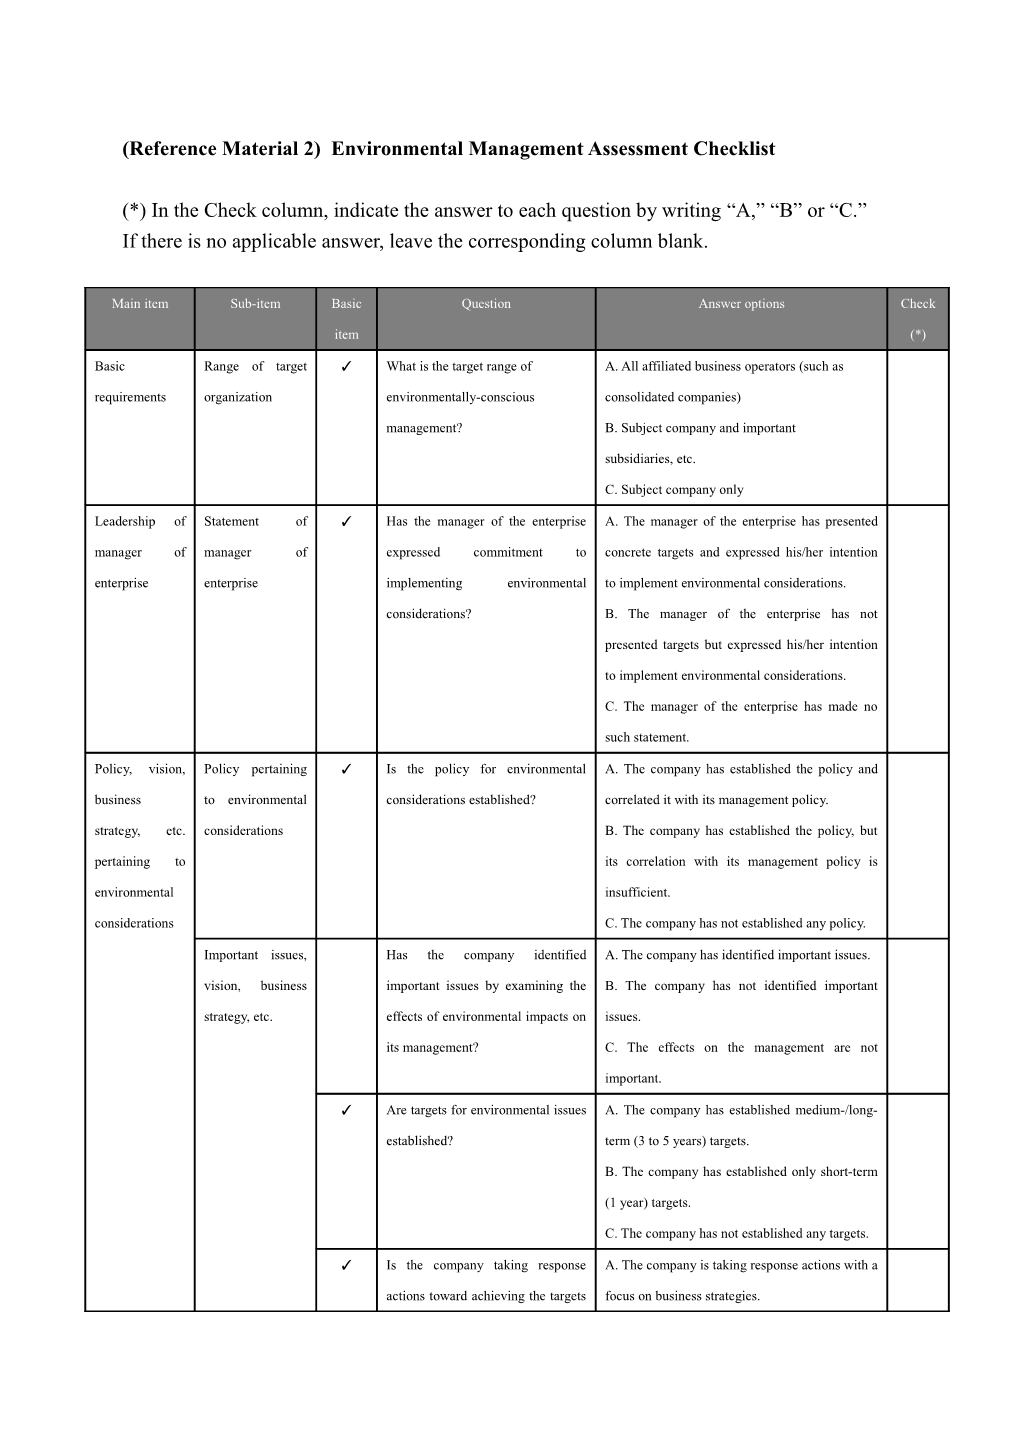 (Reference Material2) Environmental Management Assessment Checklist